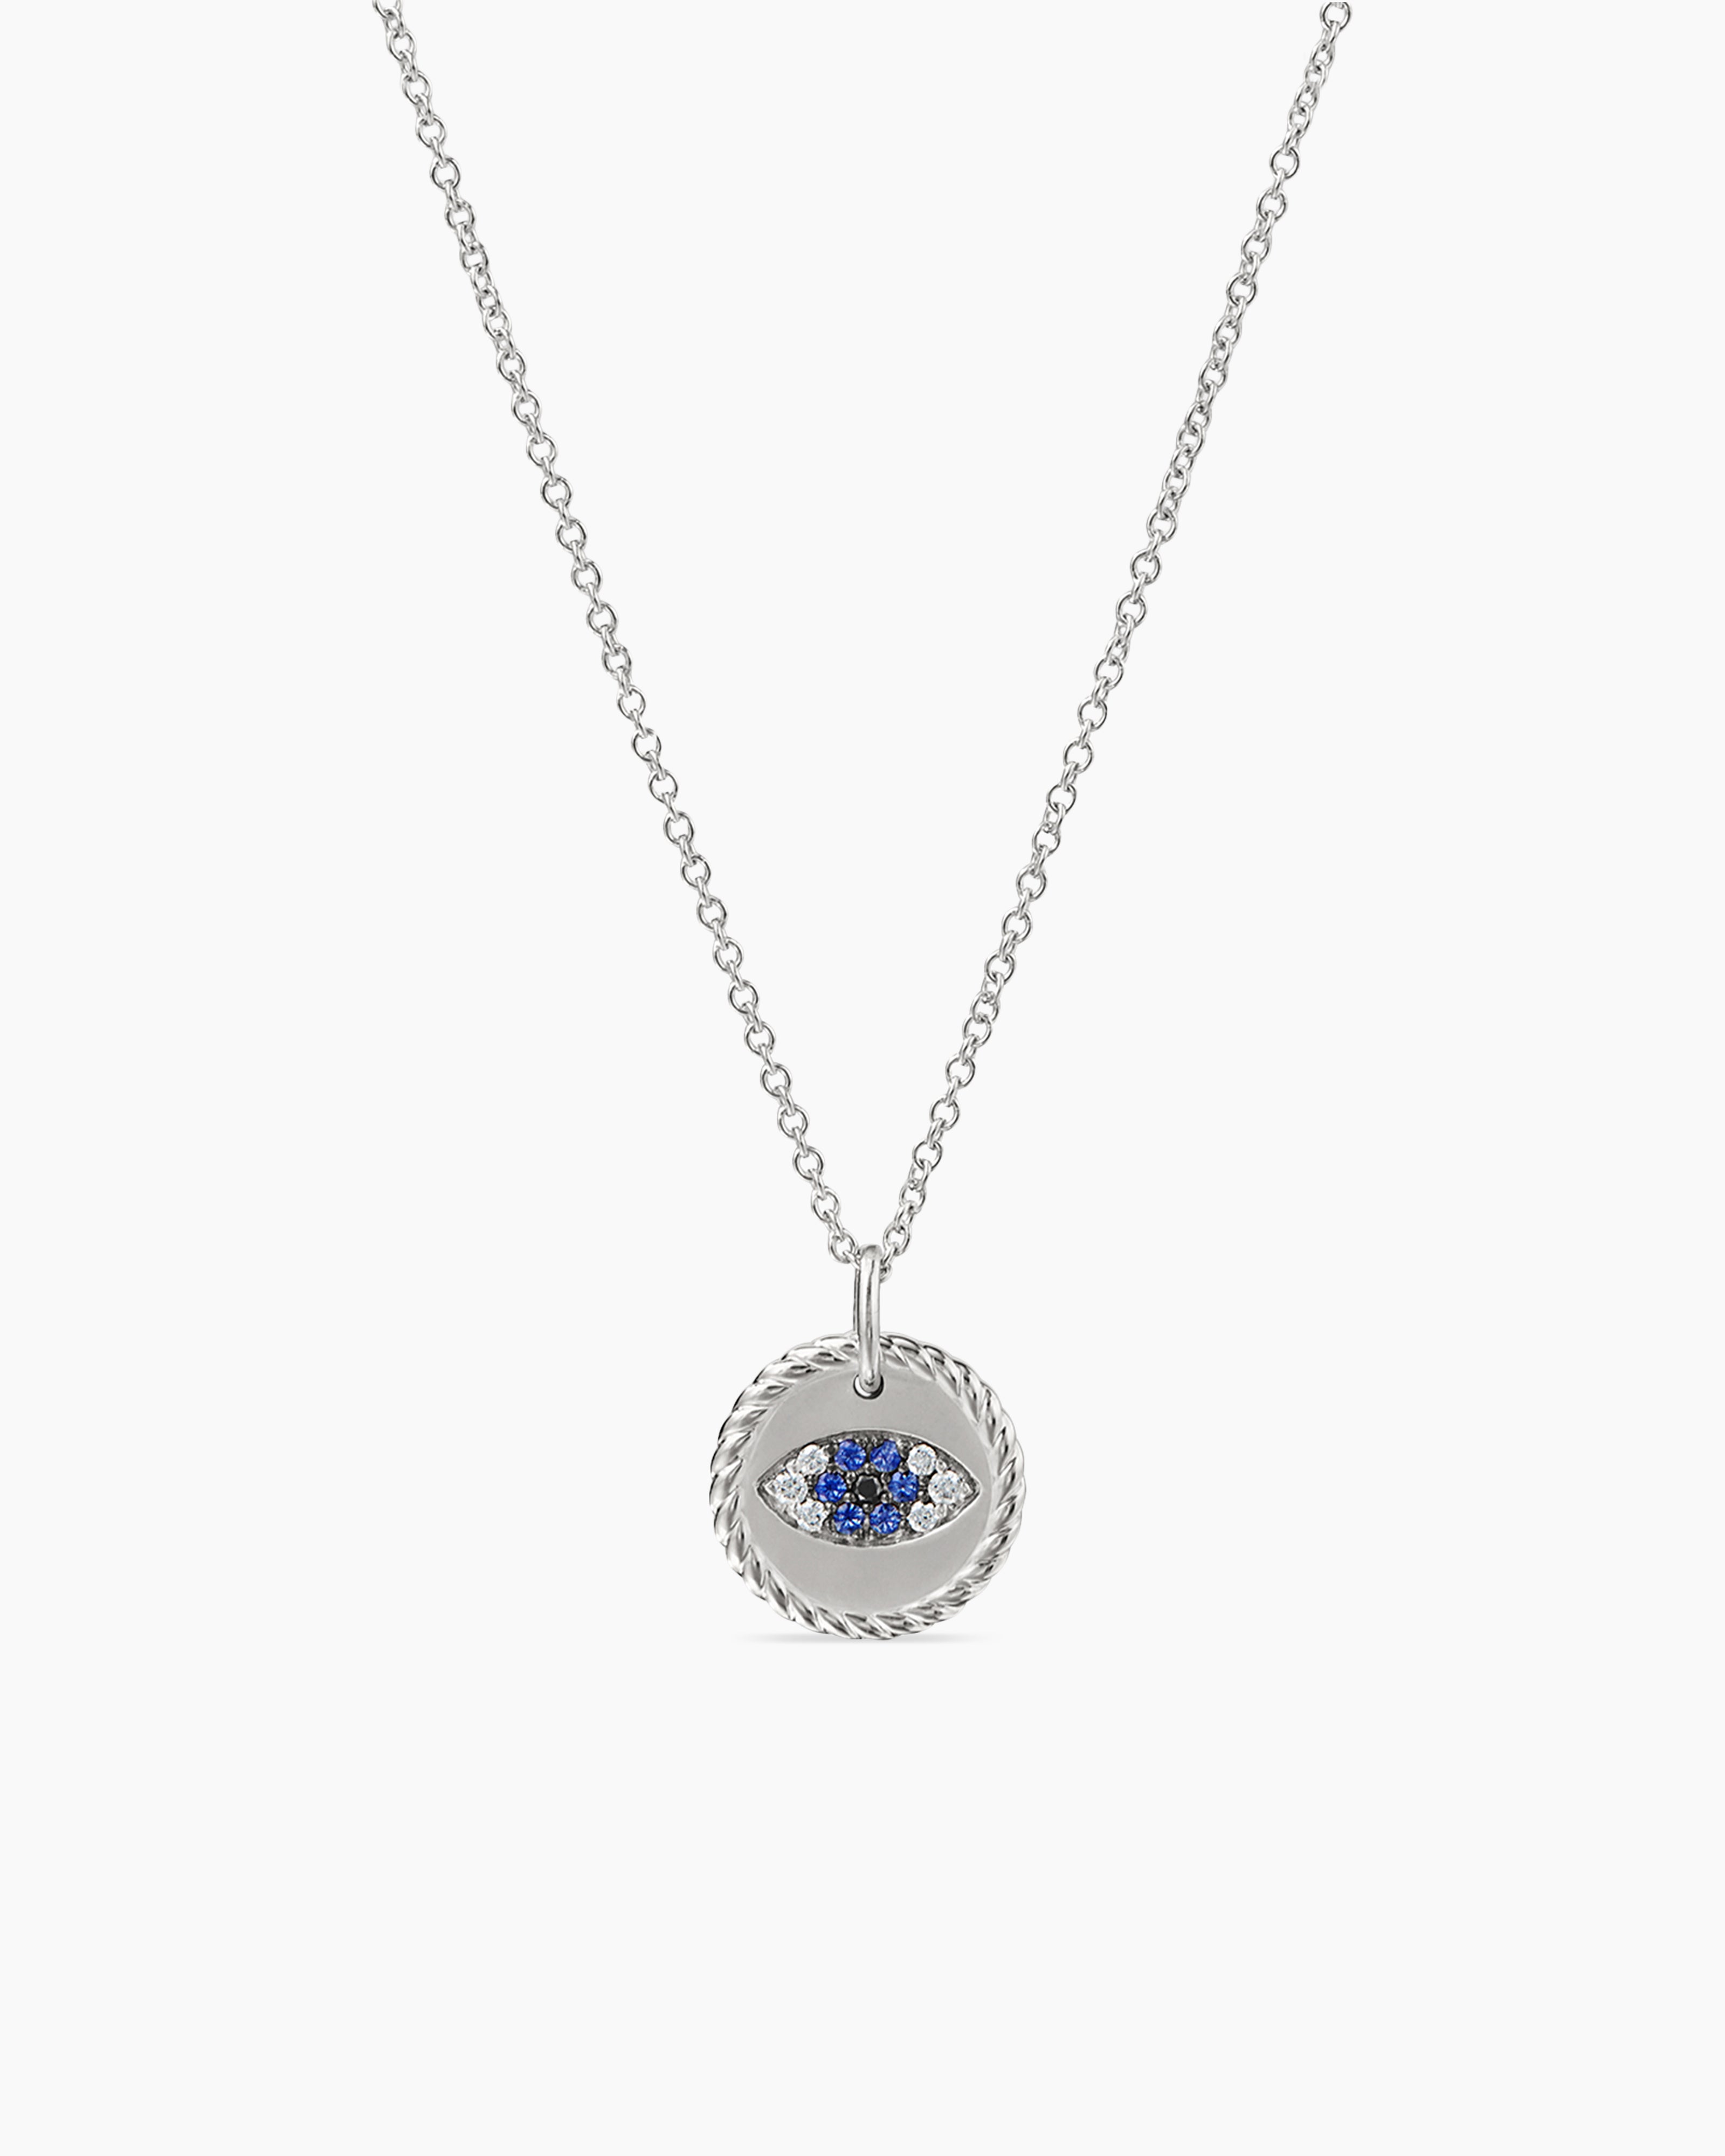 Evil Eye Necklace - Layers of Jewelry